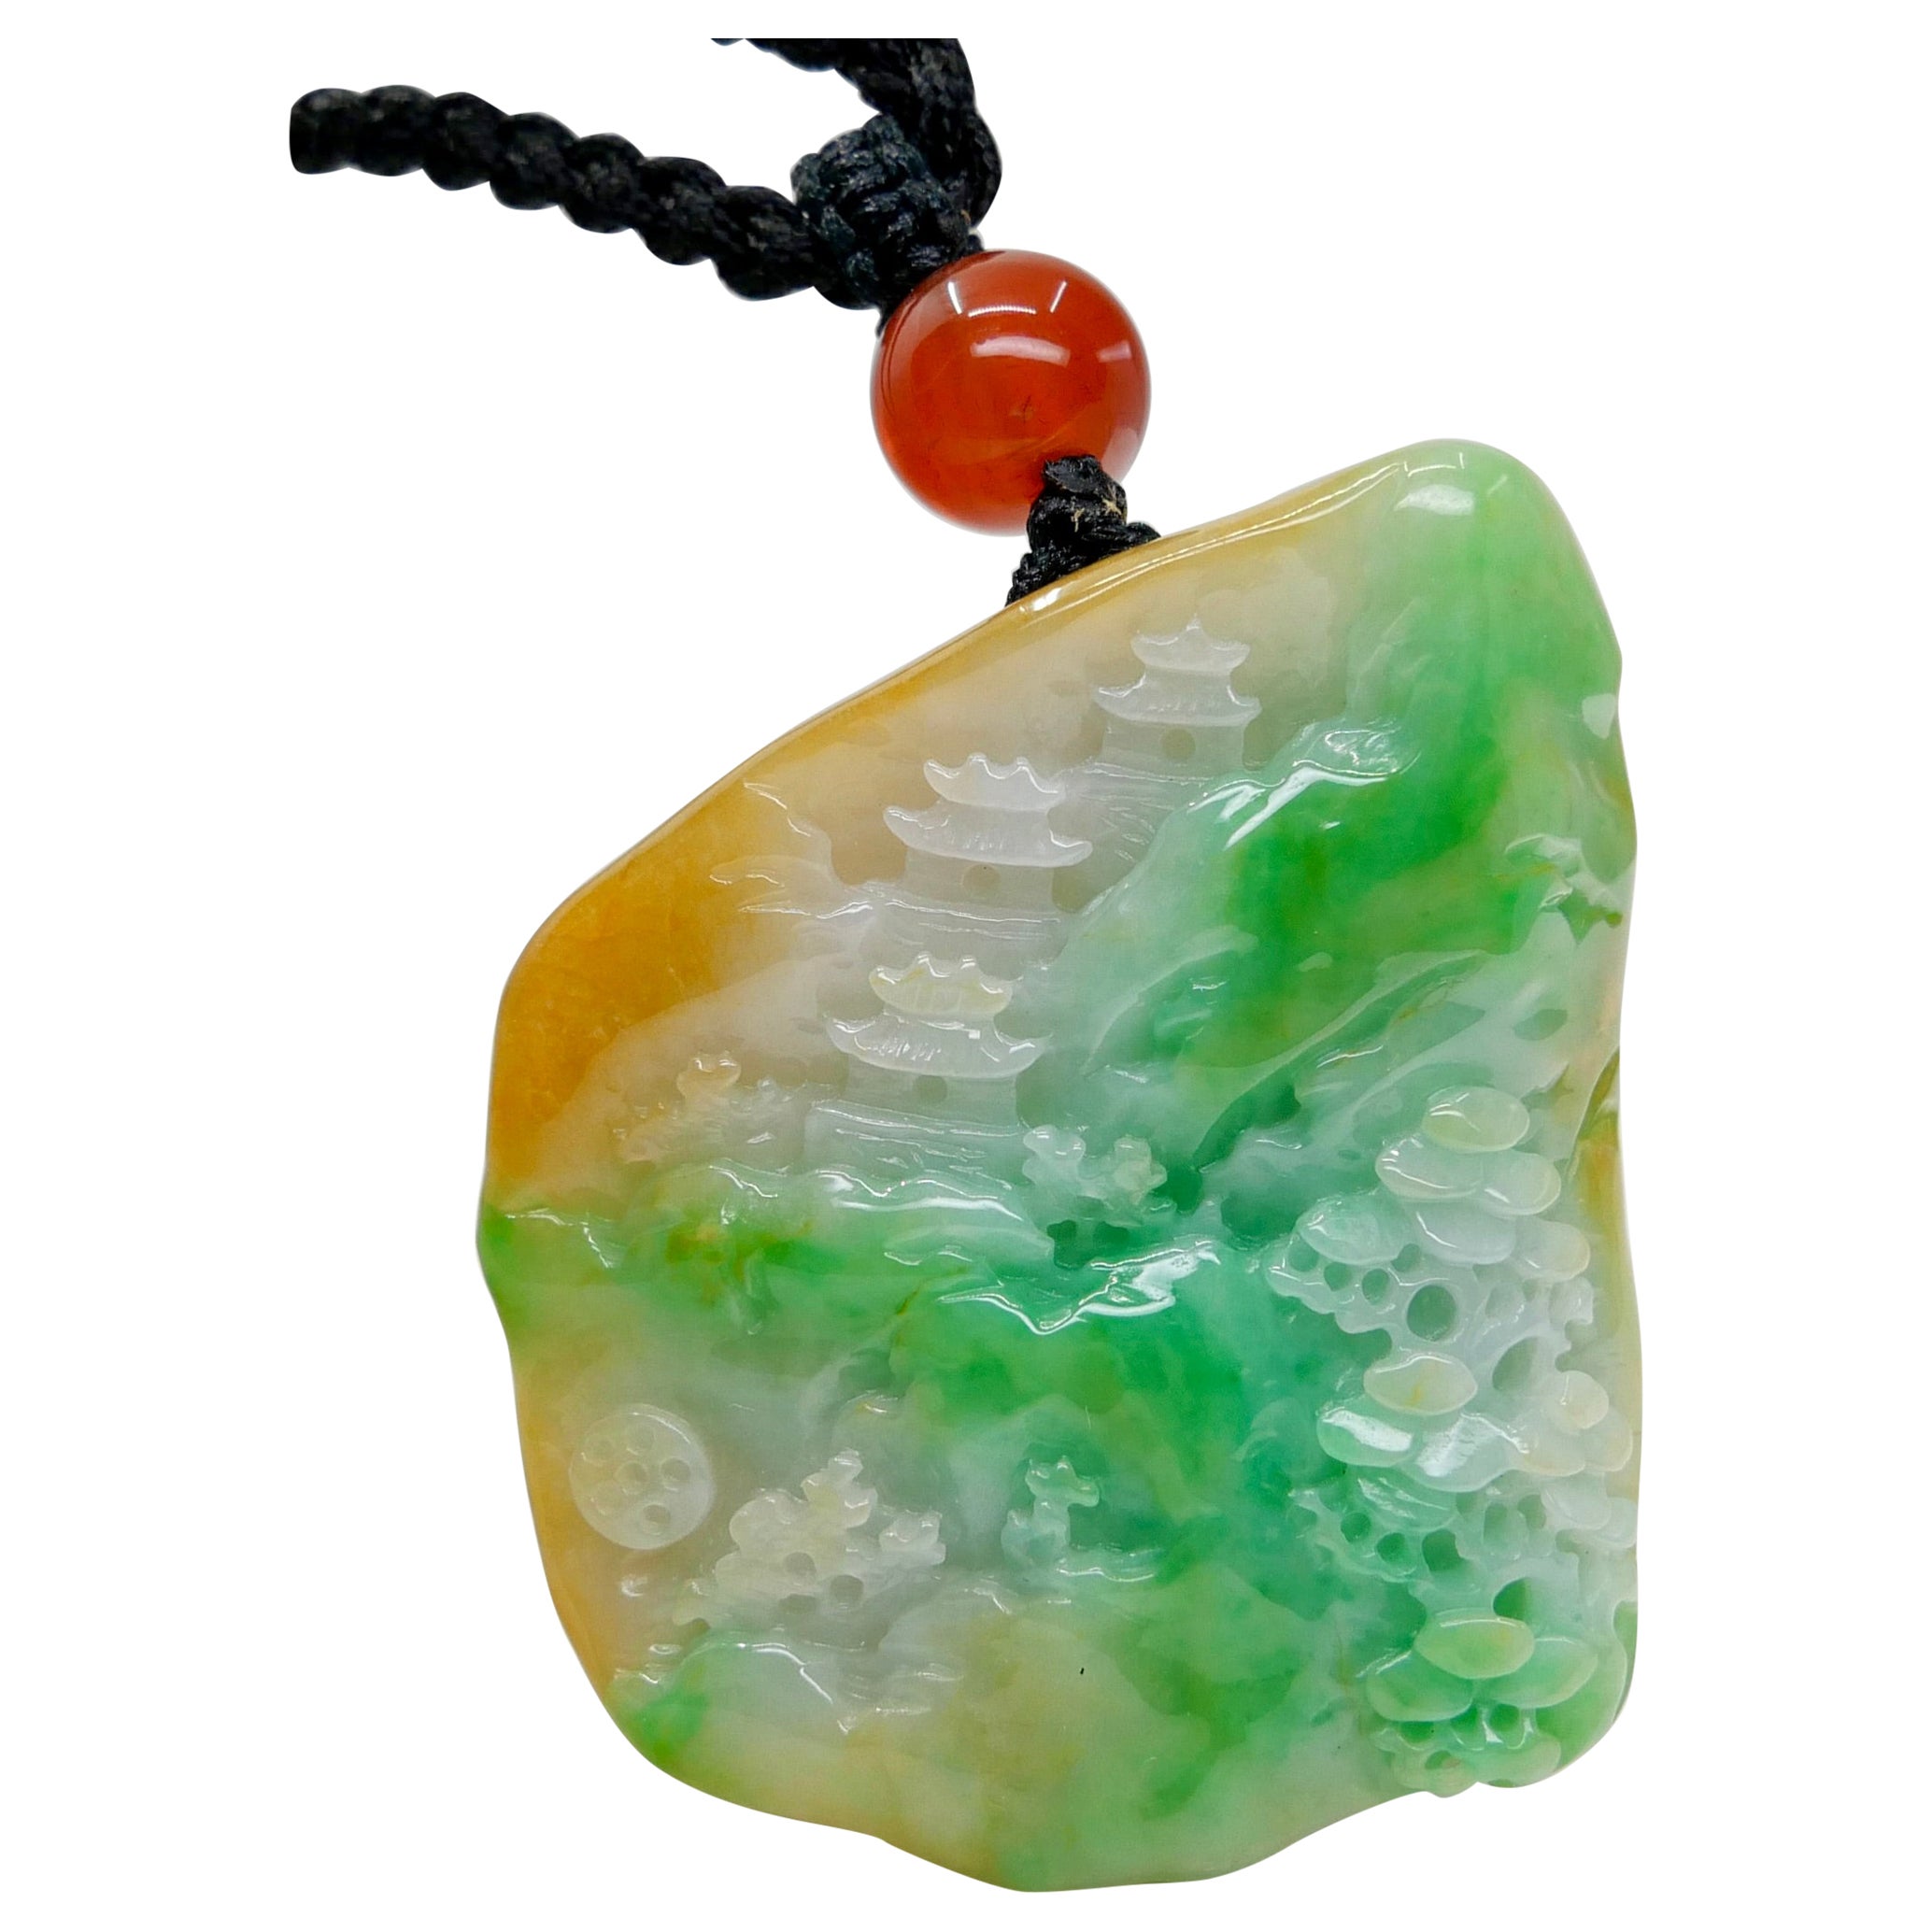 Certified Natural Multi Color Jade & Agate Pendant Necklace Exquisite Carving For Sale